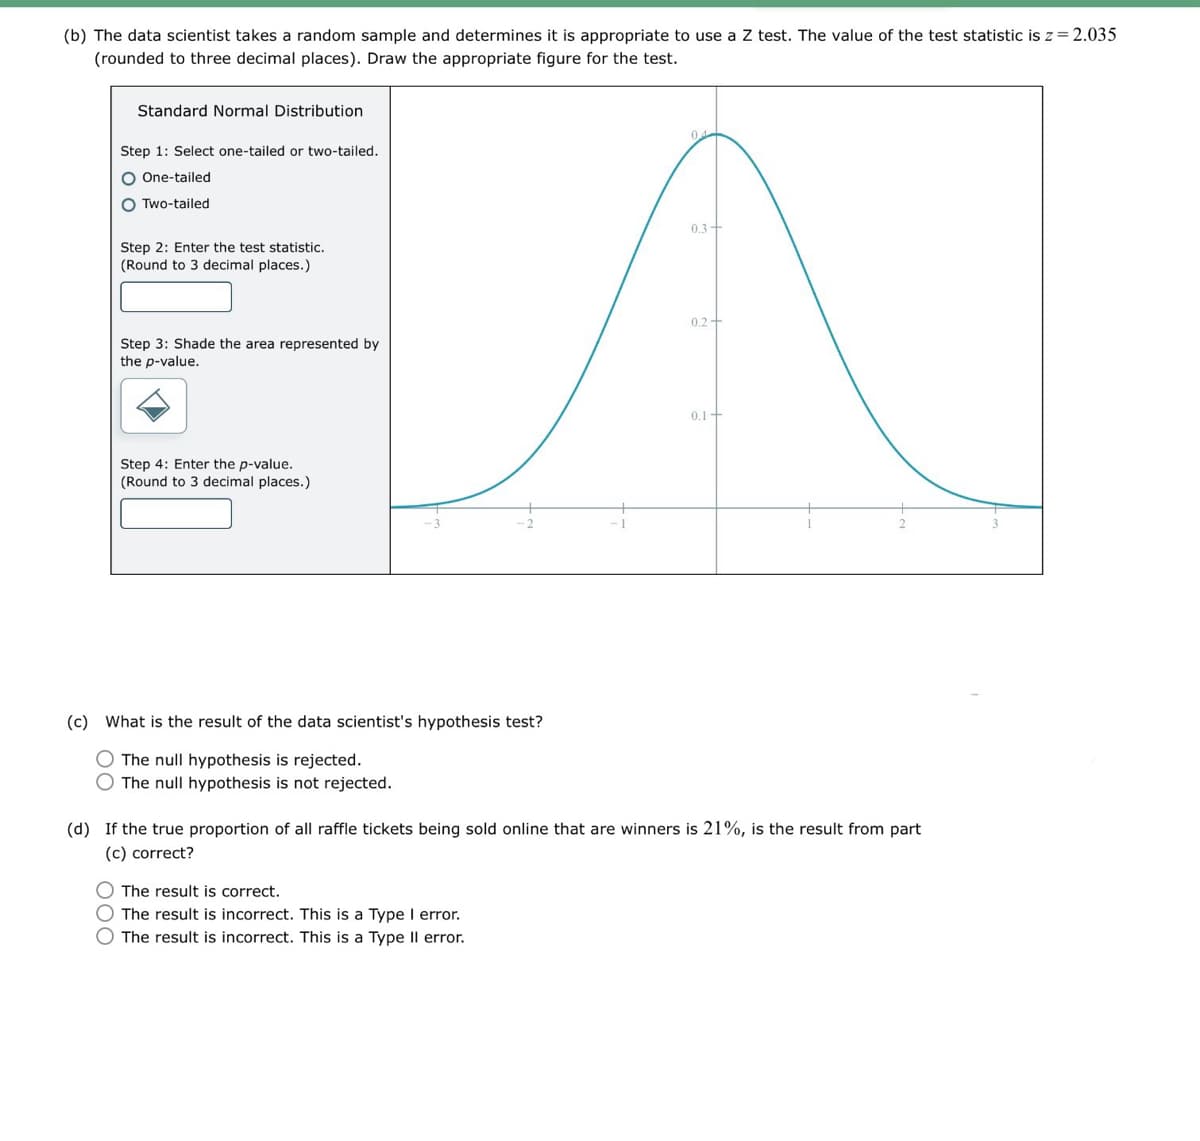 (b) The data scientist takes a random sample and determines it is appropriate to use a Z test. The value of the test statistic is z = 2.035
(rounded to three decimal places). Draw the appropriate figure for the test.
Standard Normal Distribution
Step 1: Select one-tailed or two-tailed.
One-tailed
Two-tailed
Step 2: Enter the test statistic.
(Round to 3 decimal places.)
04
0.3
0.2-
Step 3: Shade the area represented by
the p-value.
Step 4: Enter the p-value.
(Round to 3 decimal places.)
0.1+
(c) What is the result of the data scientist's hypothesis test?
The null hypothesis is rejected.
The null hypothesis is not rejected.
(d) If the true proportion of all raffle tickets being sold online that are winners is 21%, is the result from part
(c) correct?
The result is correct.
The result is incorrect. This is a Type I error.
The result is incorrect. This is a Type II error.